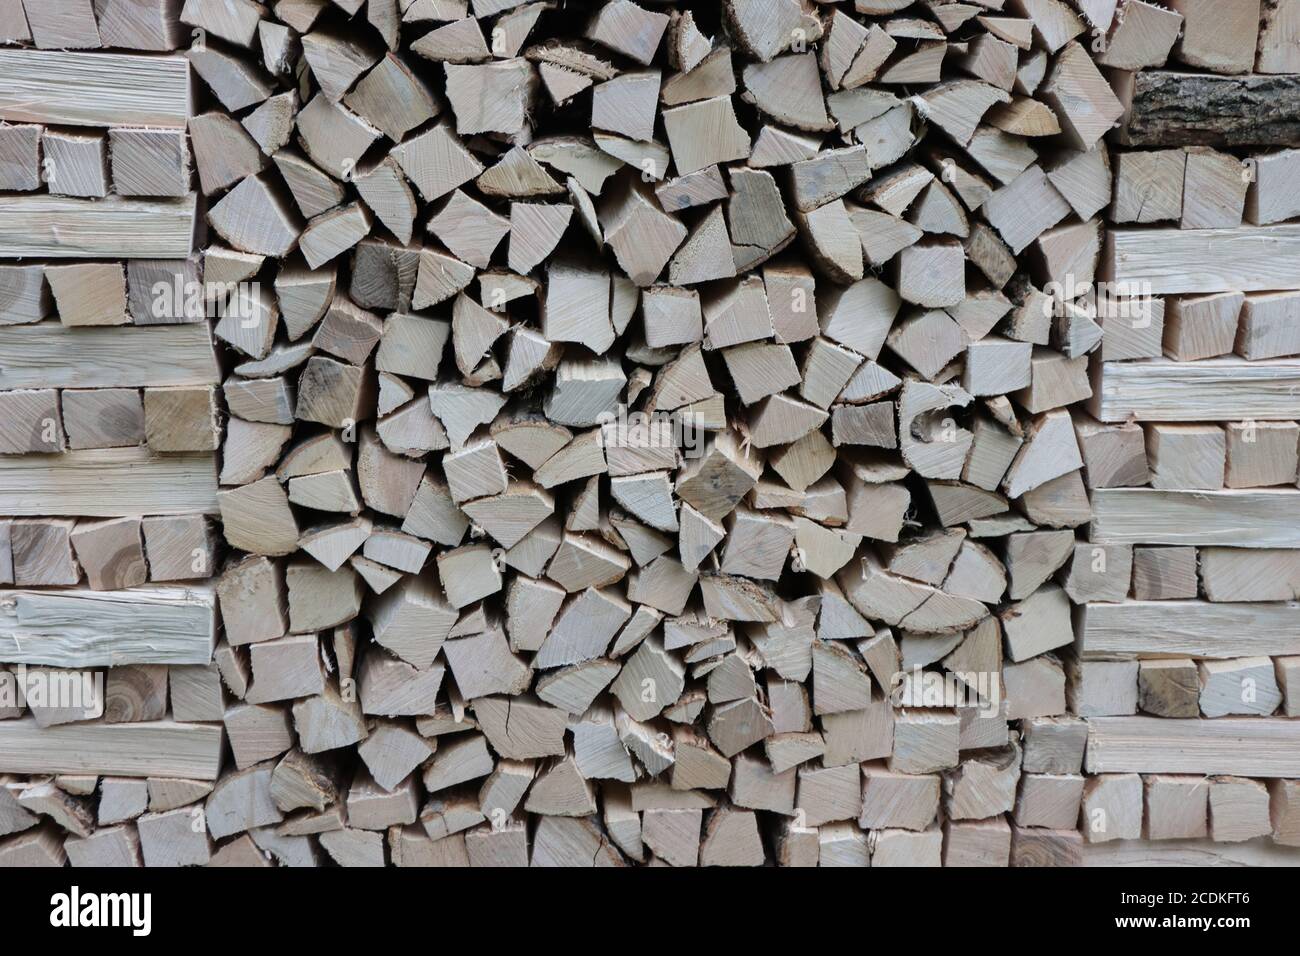 A pile of logs in front of a house. Stock Photo